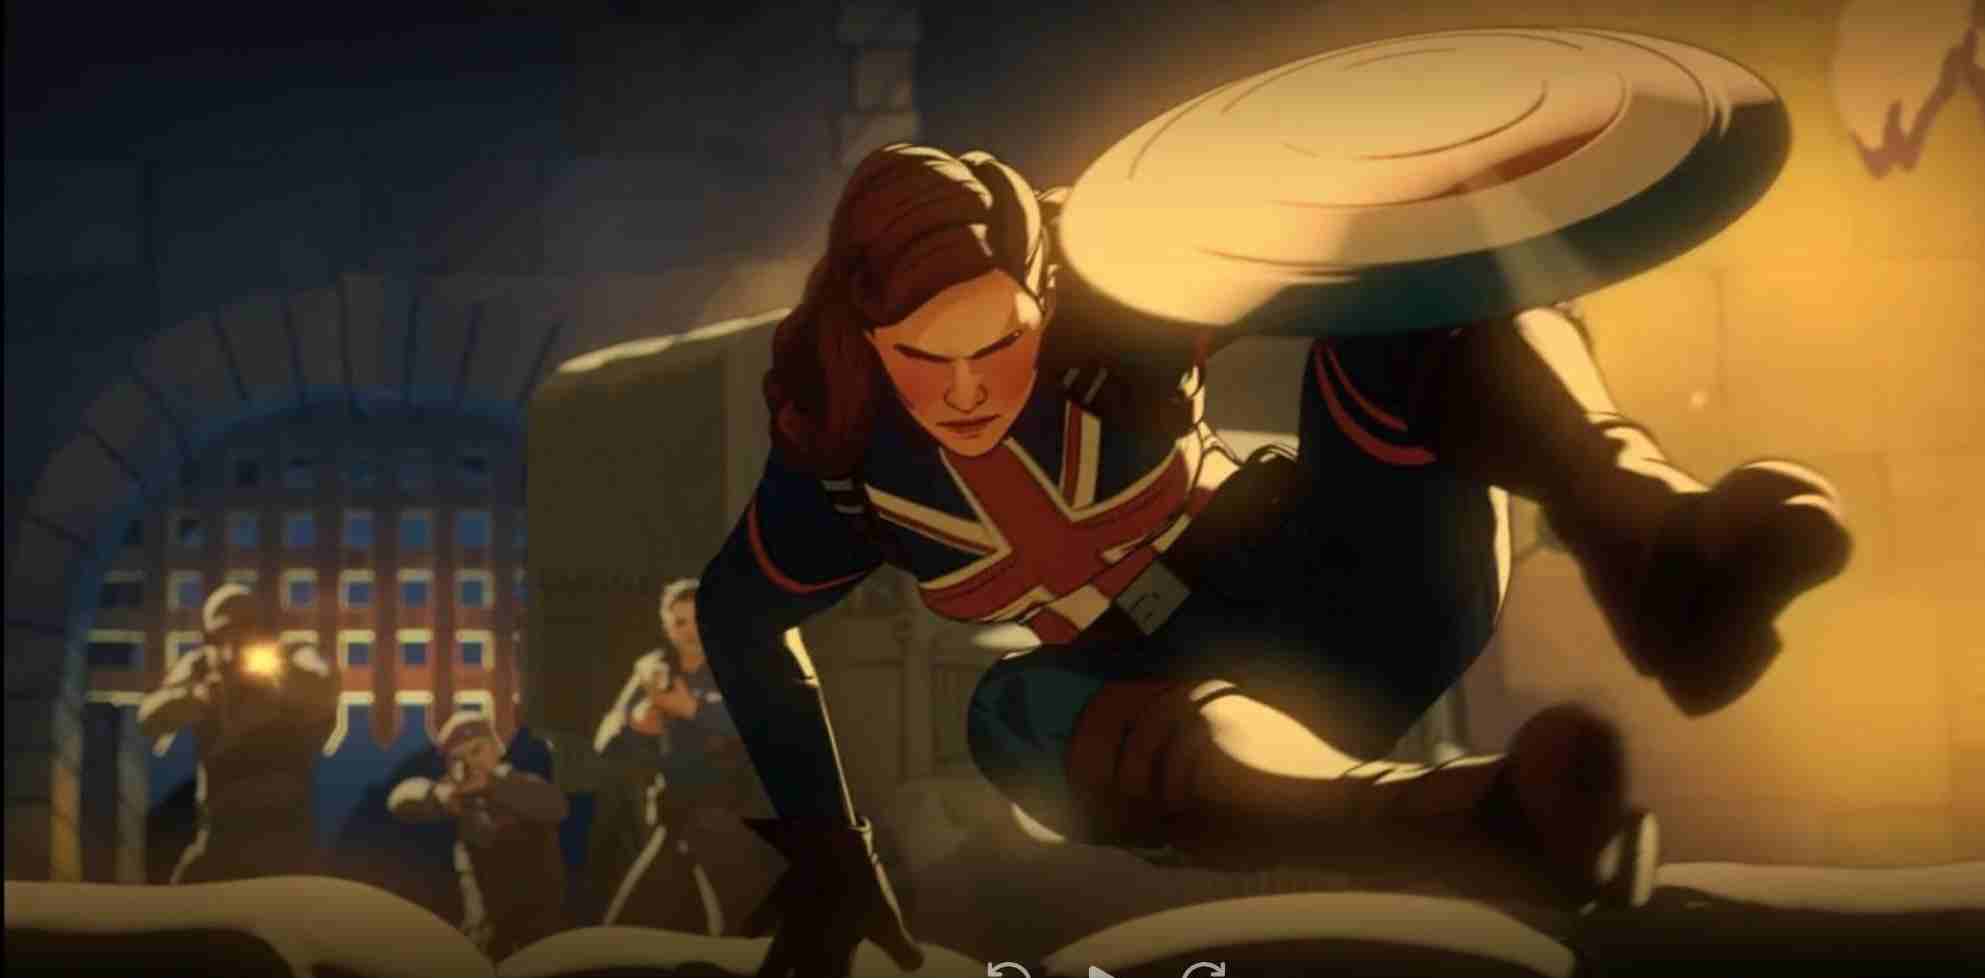 Peggy, in her Captain Britain outfit, jumps above a wall of sandbags while behind her the Howling Commandos are firing their guns.